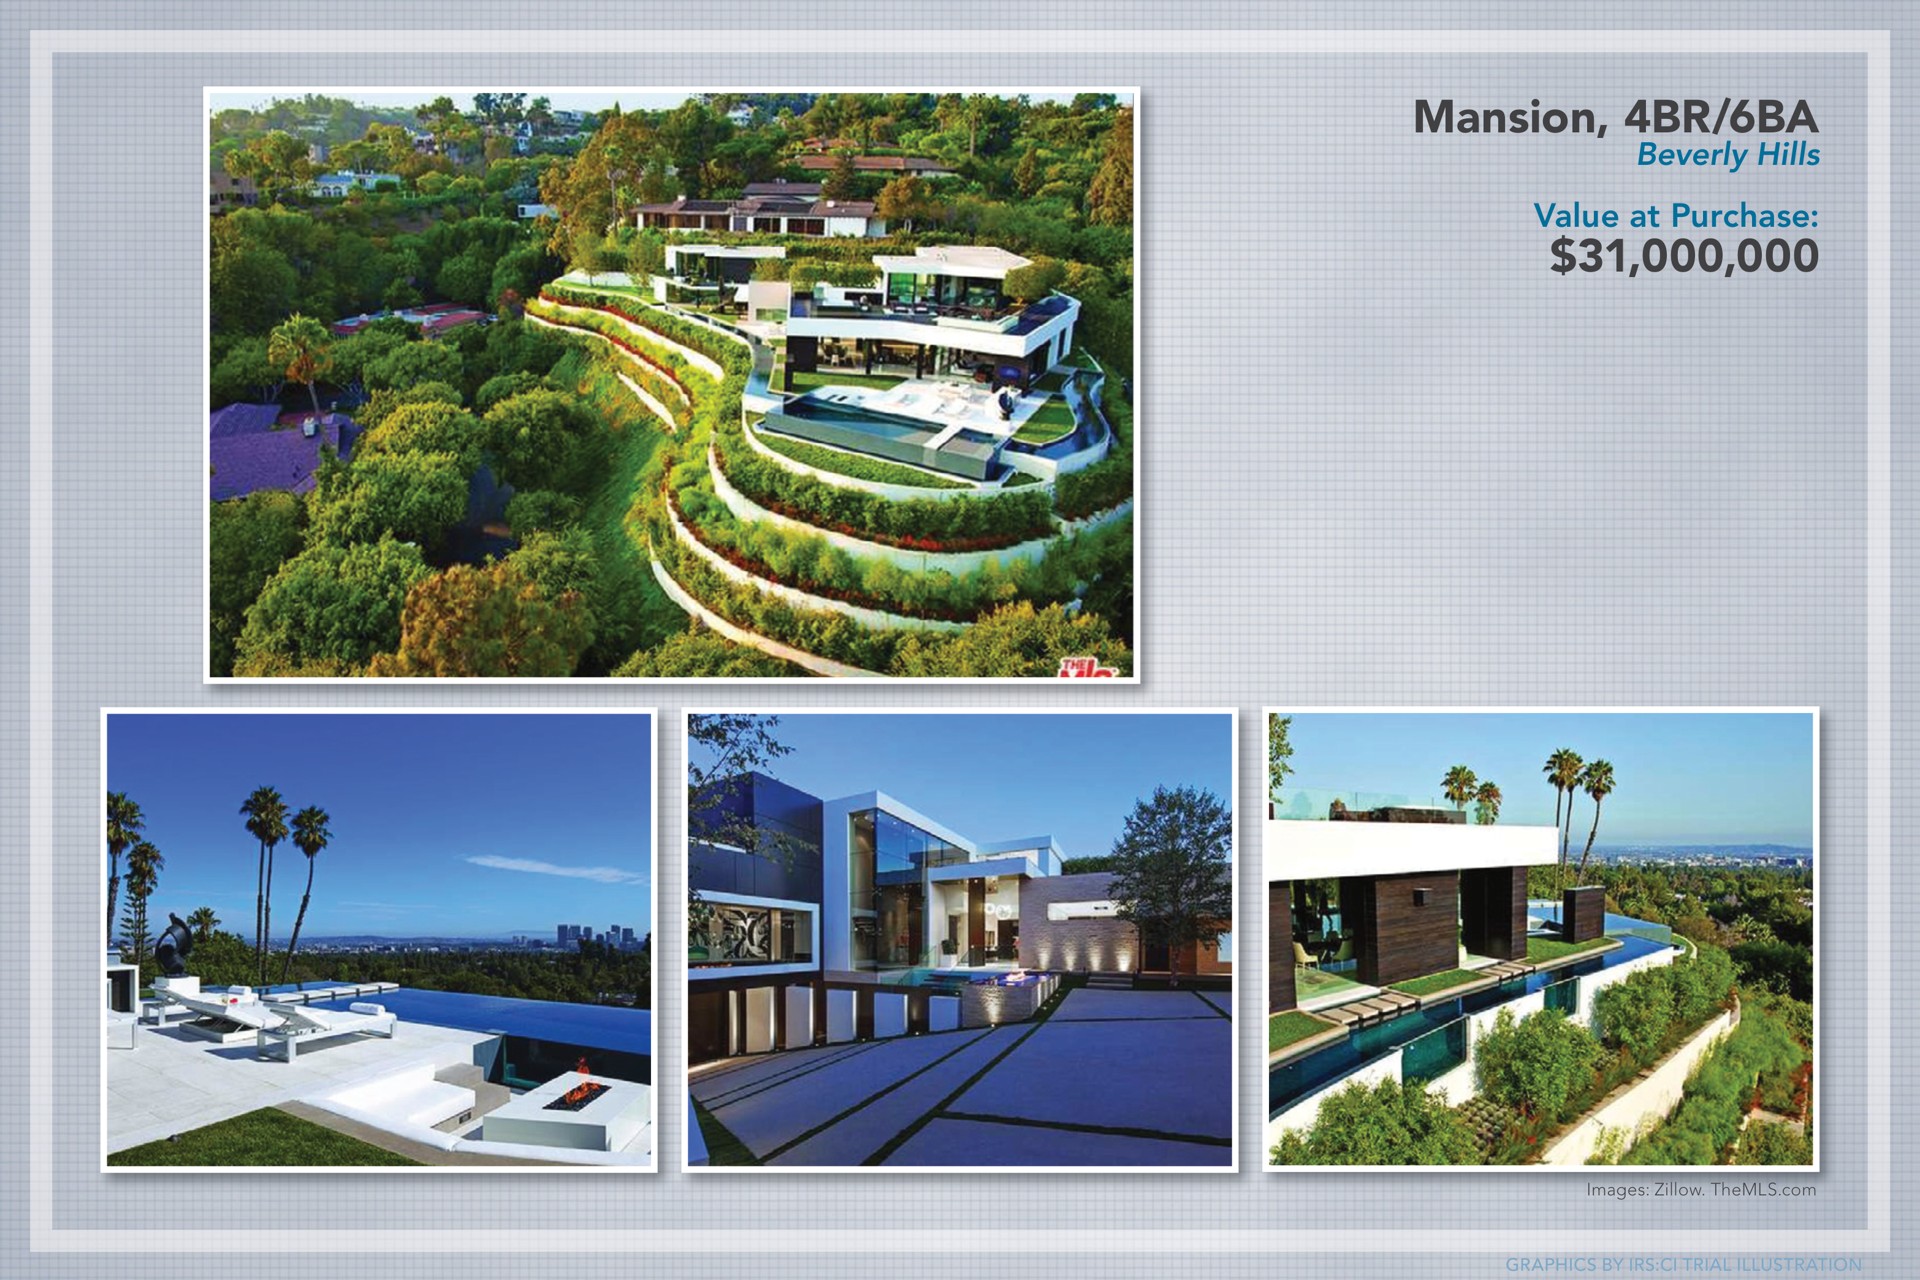 mansion hills value at purchase images | 1MDB